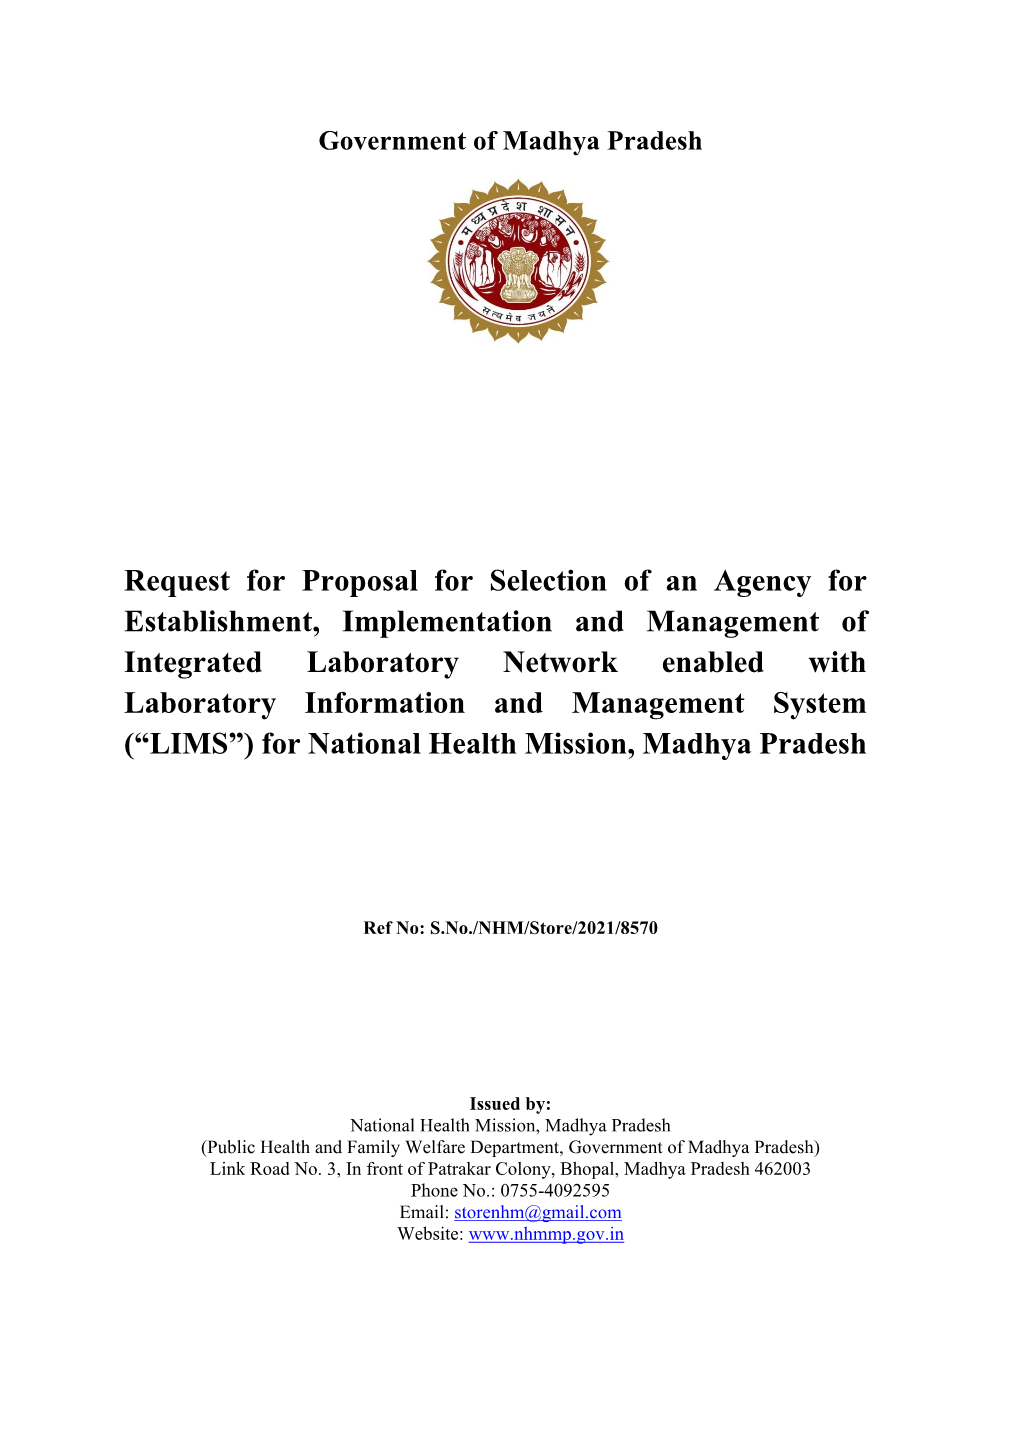 Request for Proposal for Selection of an Agency for Establishment